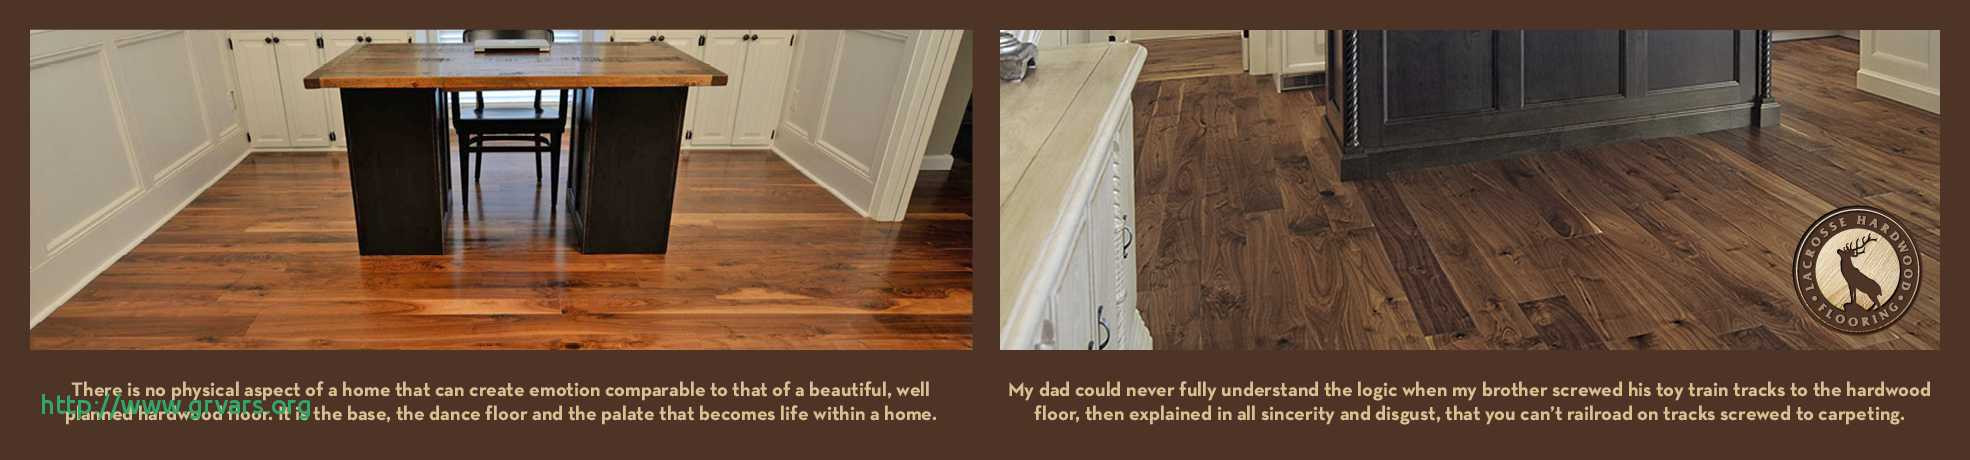 23 Awesome Price to Install Hardwood Floors Home Depot 2024 free download price to install hardwood floors home depot of 25 luxe average price for installing hardwood floors ideas blog with average price for installing hardwood floors impressionnant lacrosse hardw